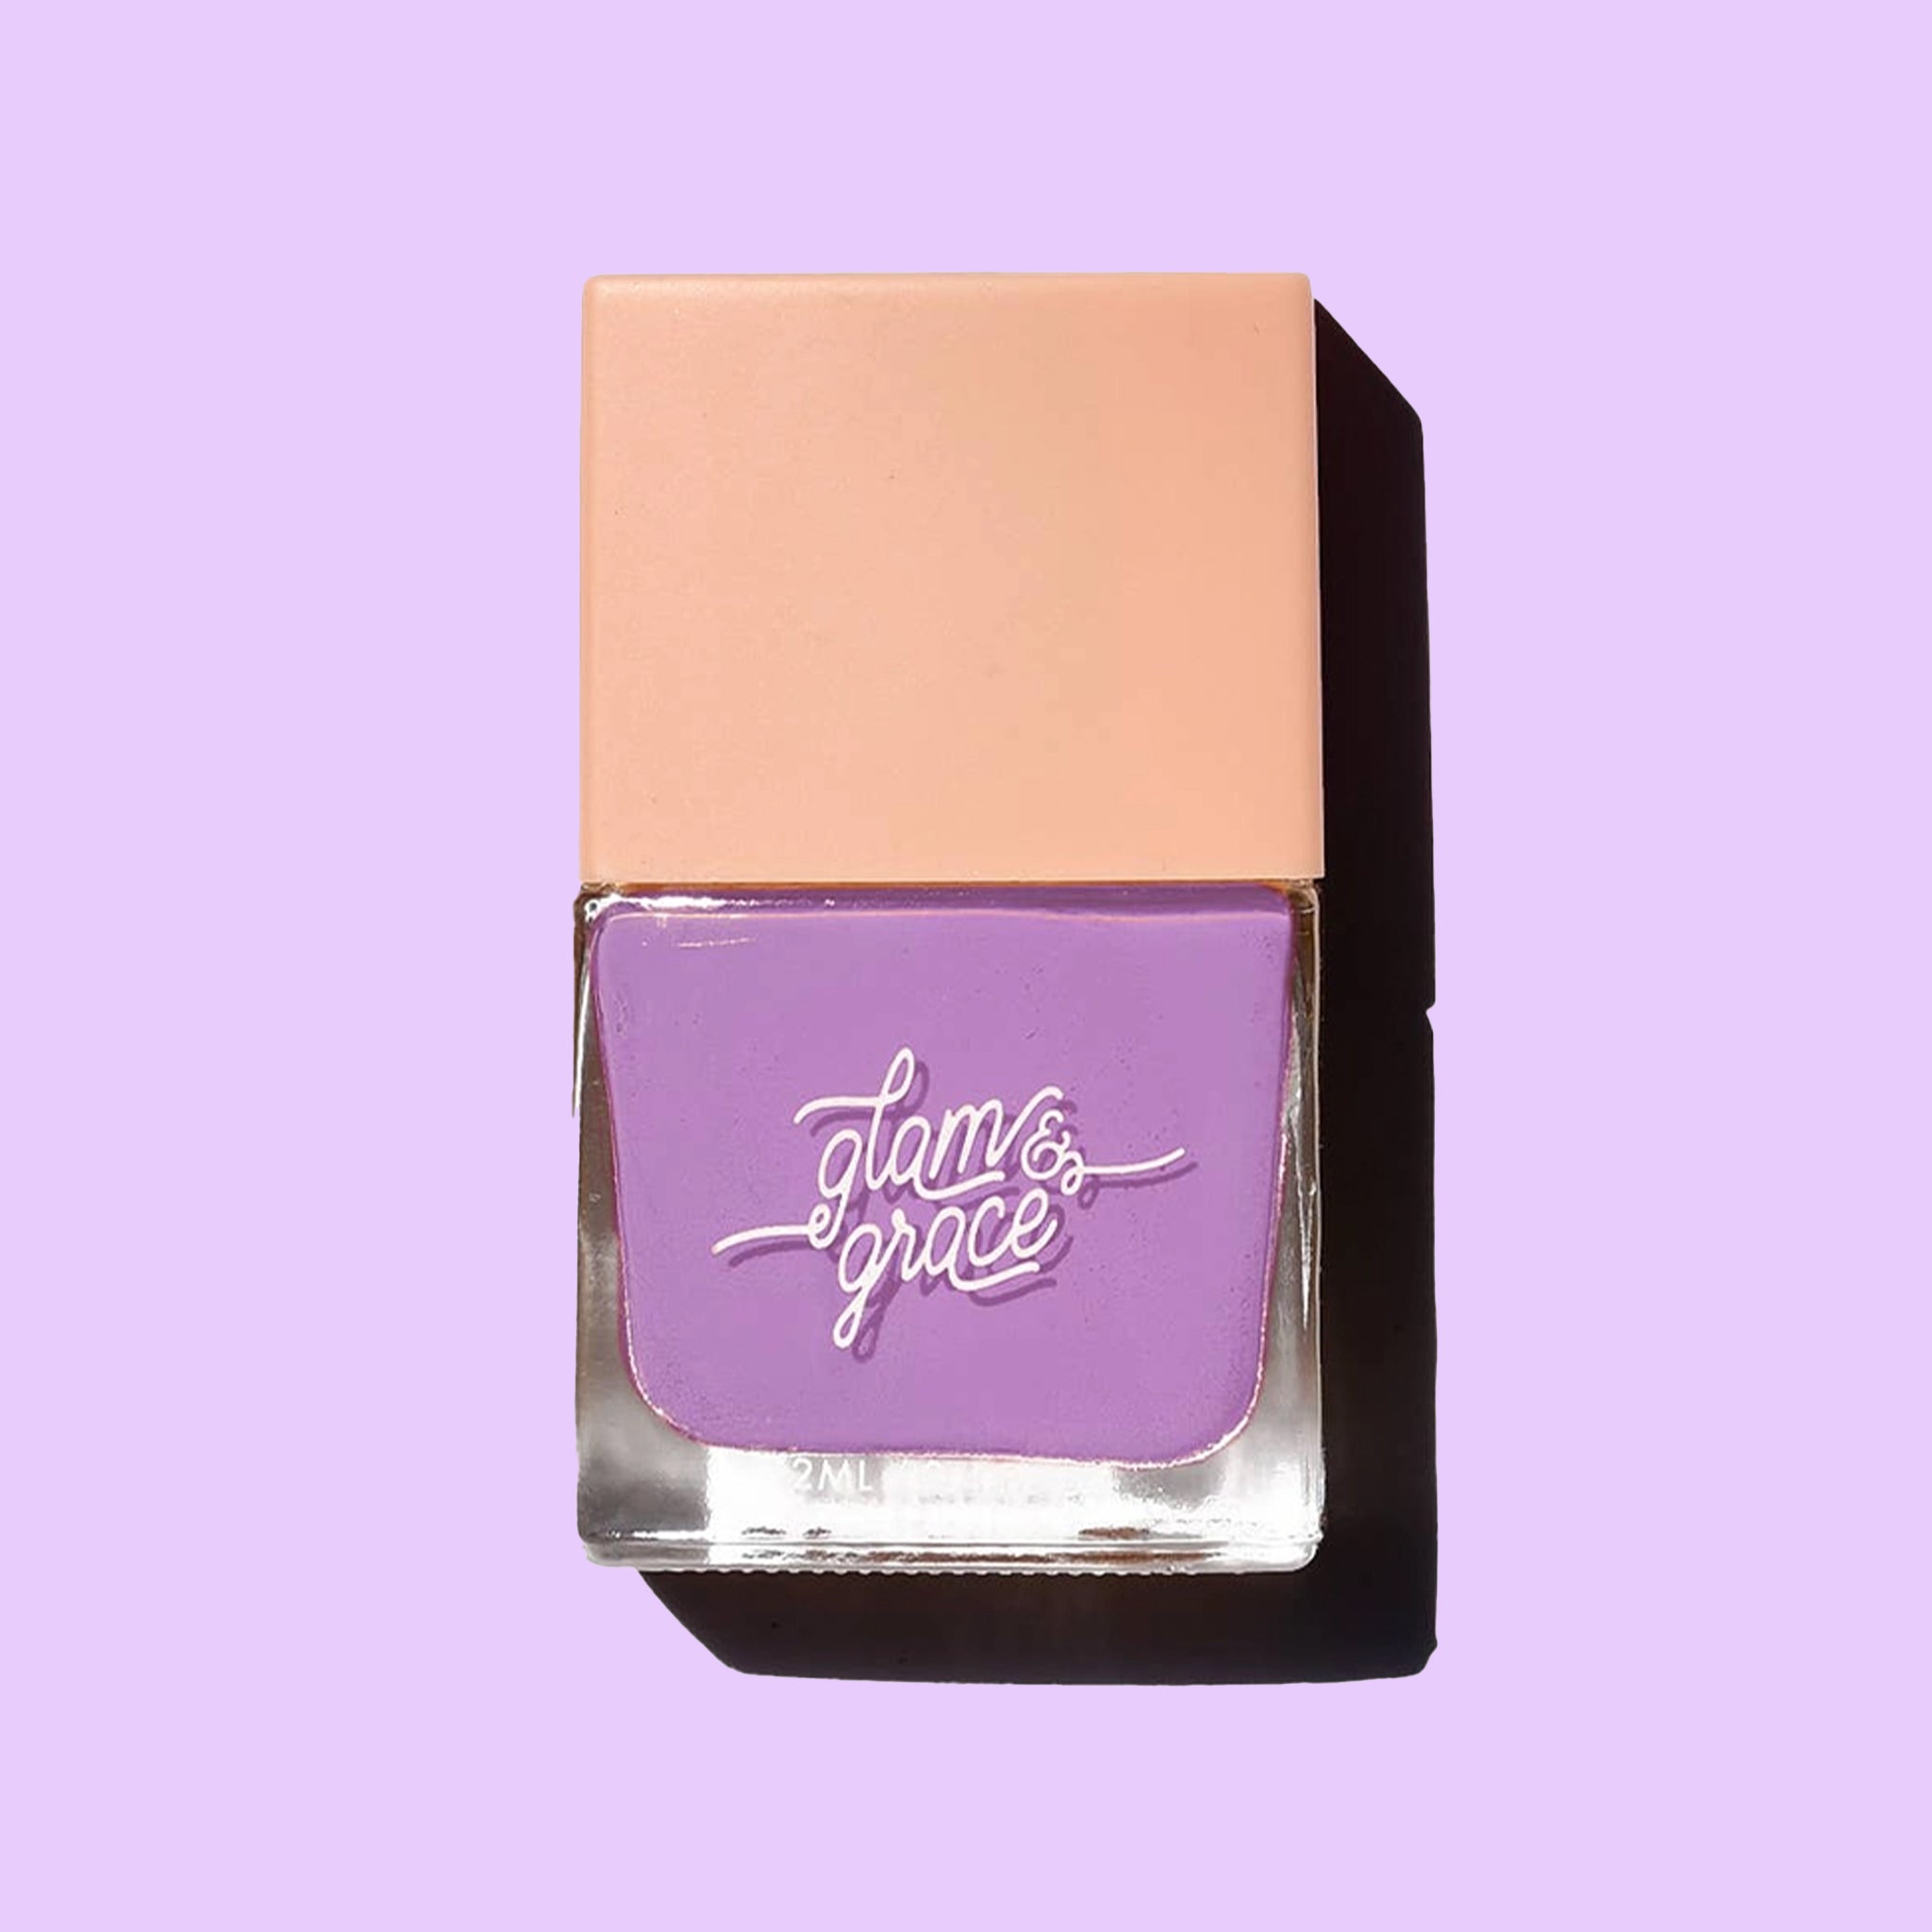 A bright purple satin nail polish in a glass bottle with a peachy square lid.